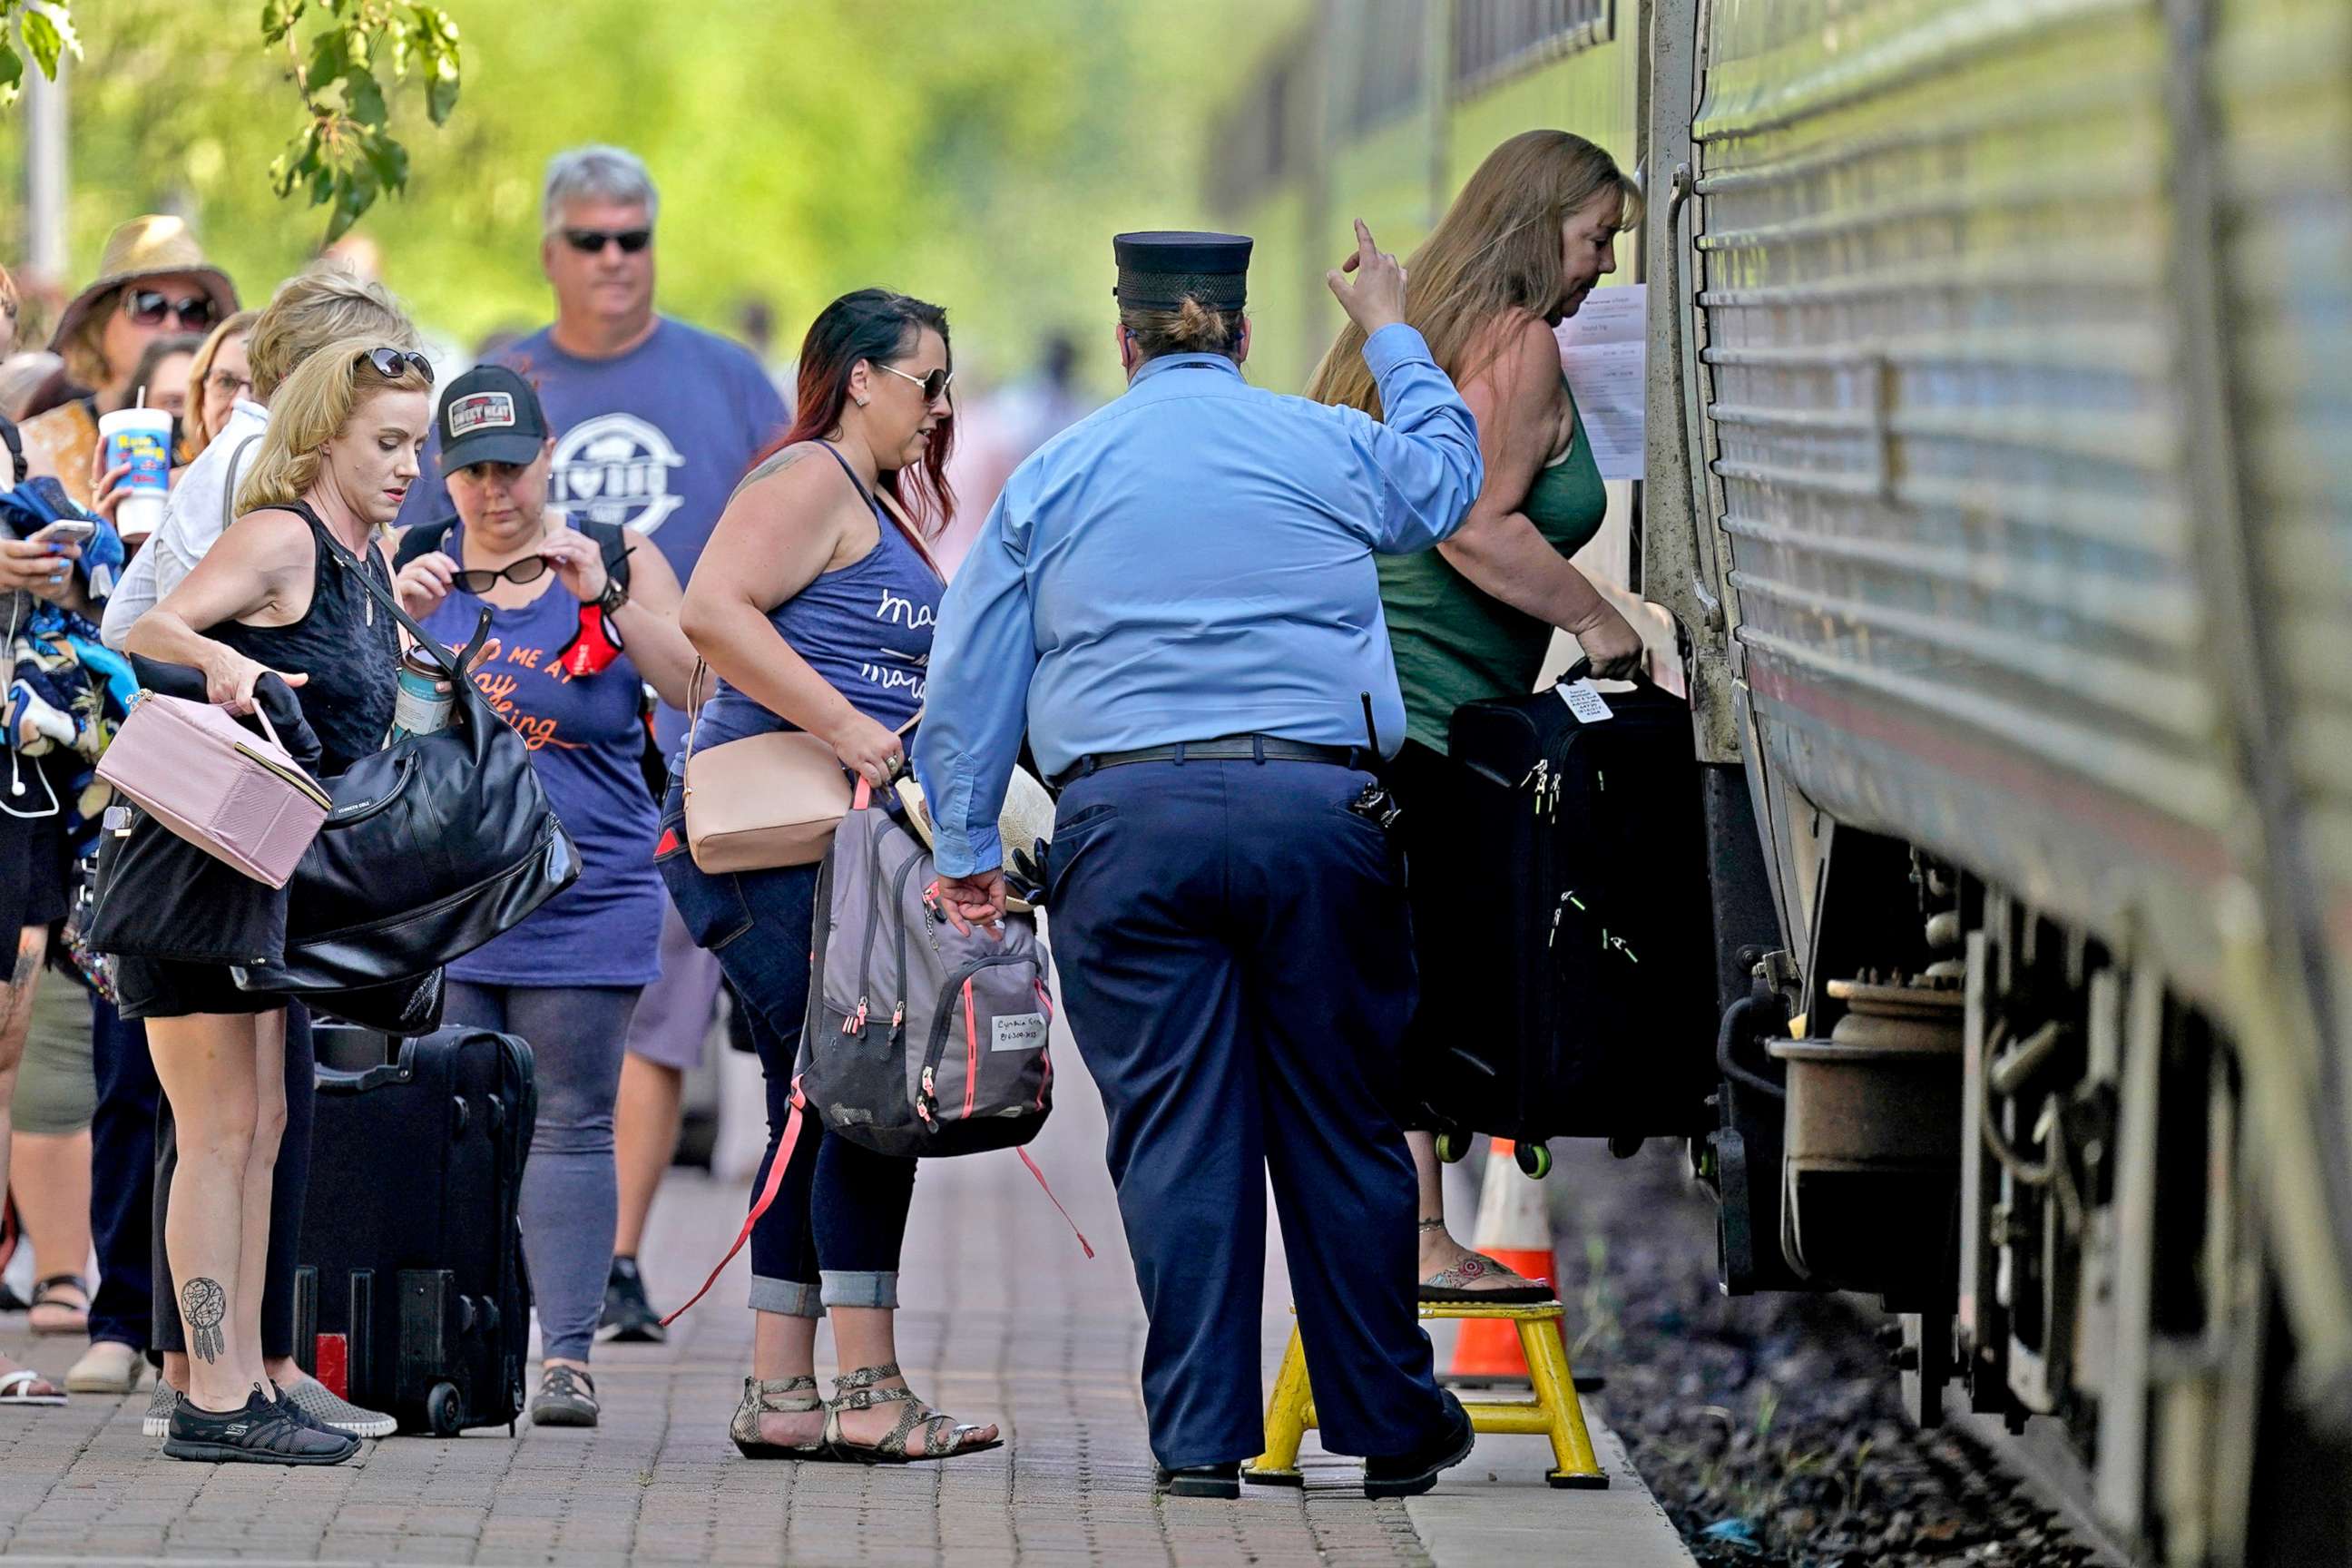 PHOTO: Passengers board a Missouri River Runner Amtrak train in Lee's Summit, Mo., June 11, 2021. Missouri is seeing an rise in COVID-19 cases because of a combination of the fast-spreading delta variant and people's resistance to getting vaccinated.